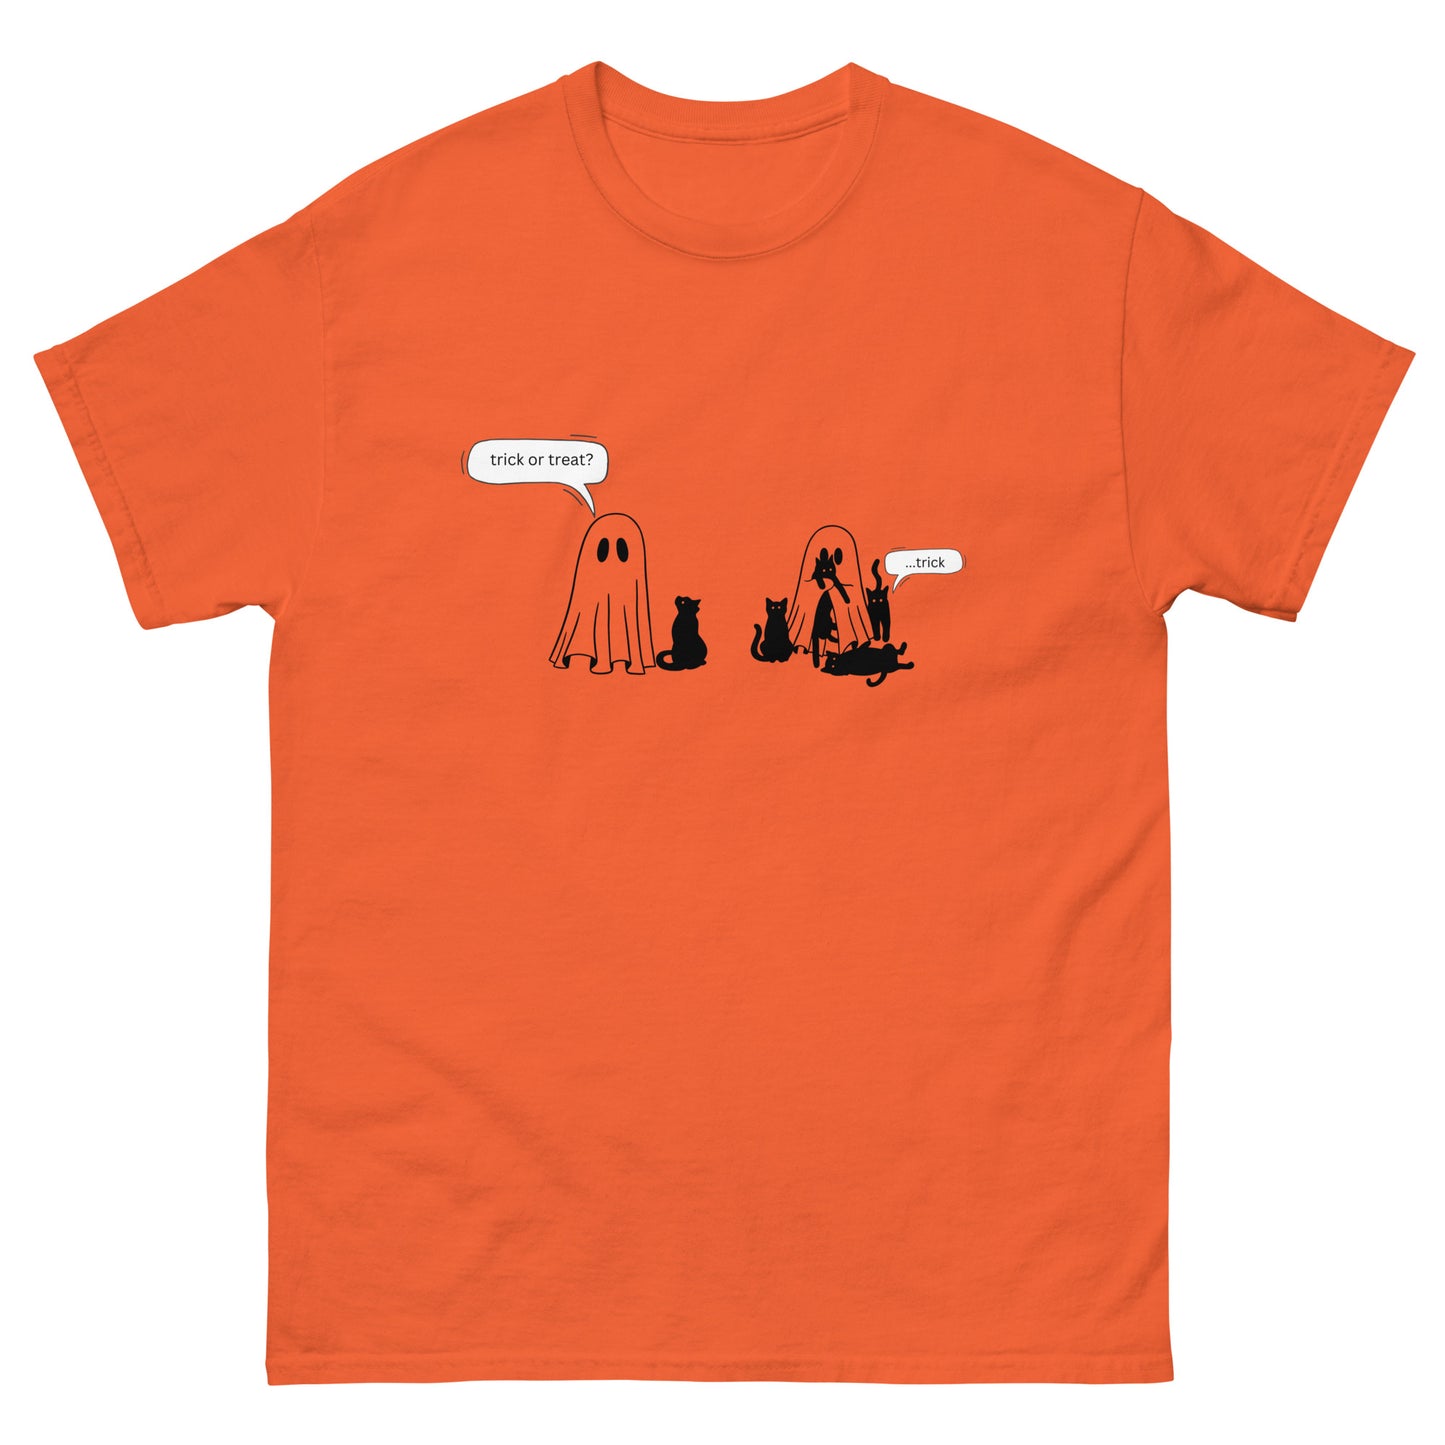 The Trick or Treat Tee